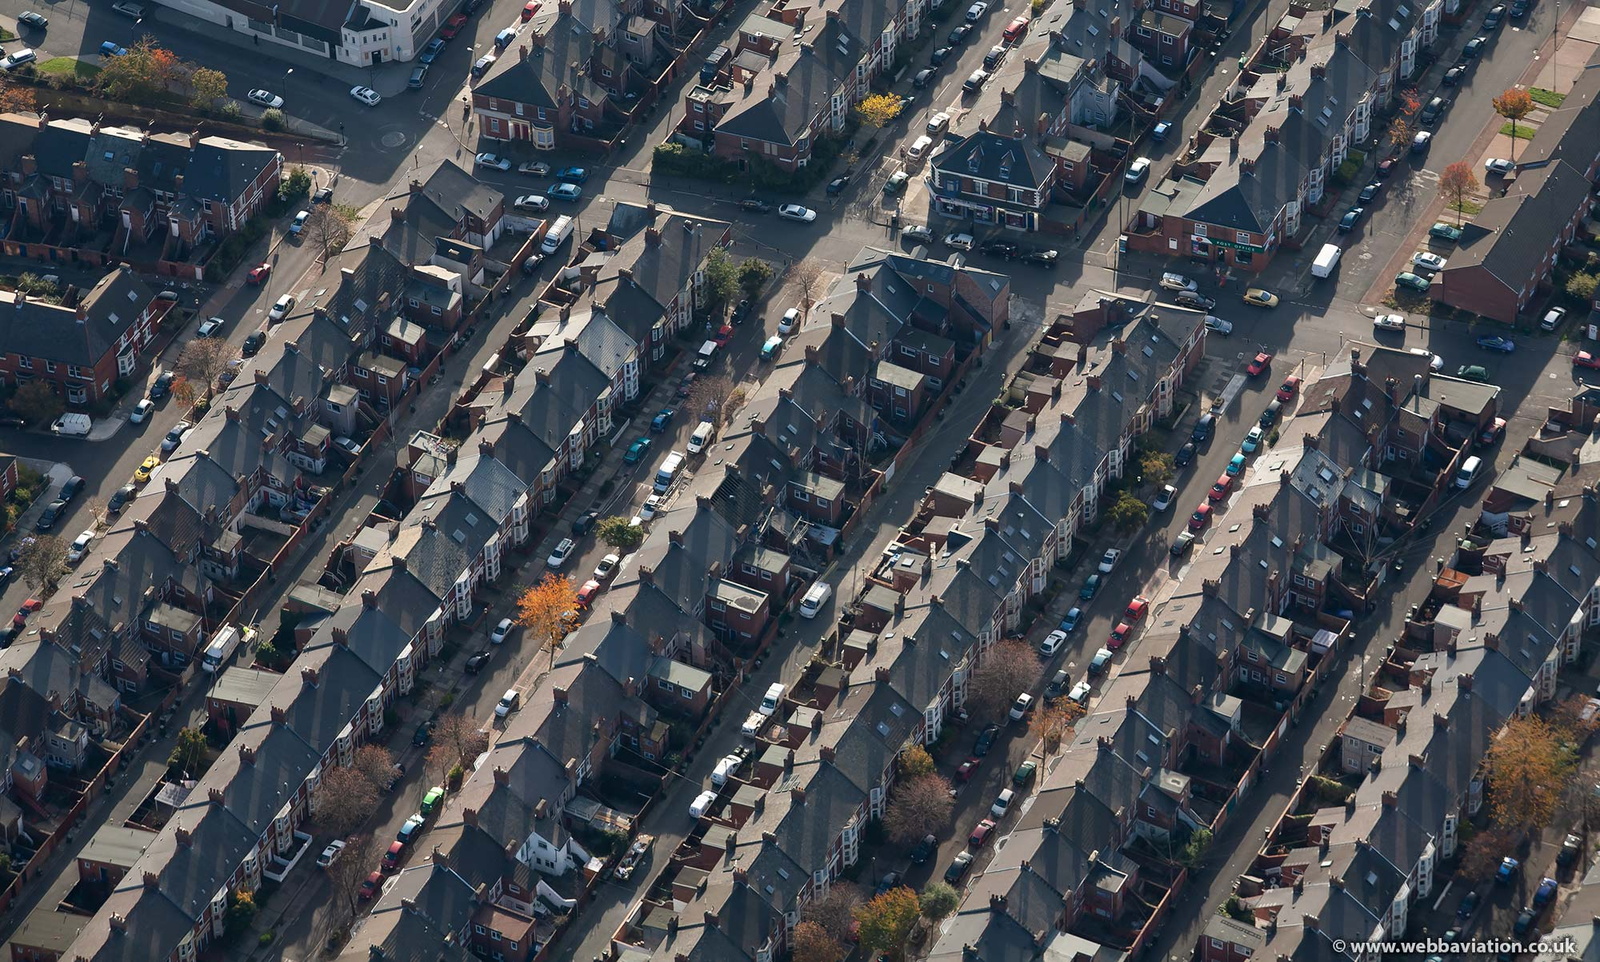  terraced housing  in Newcastle upon Tyne  from the air